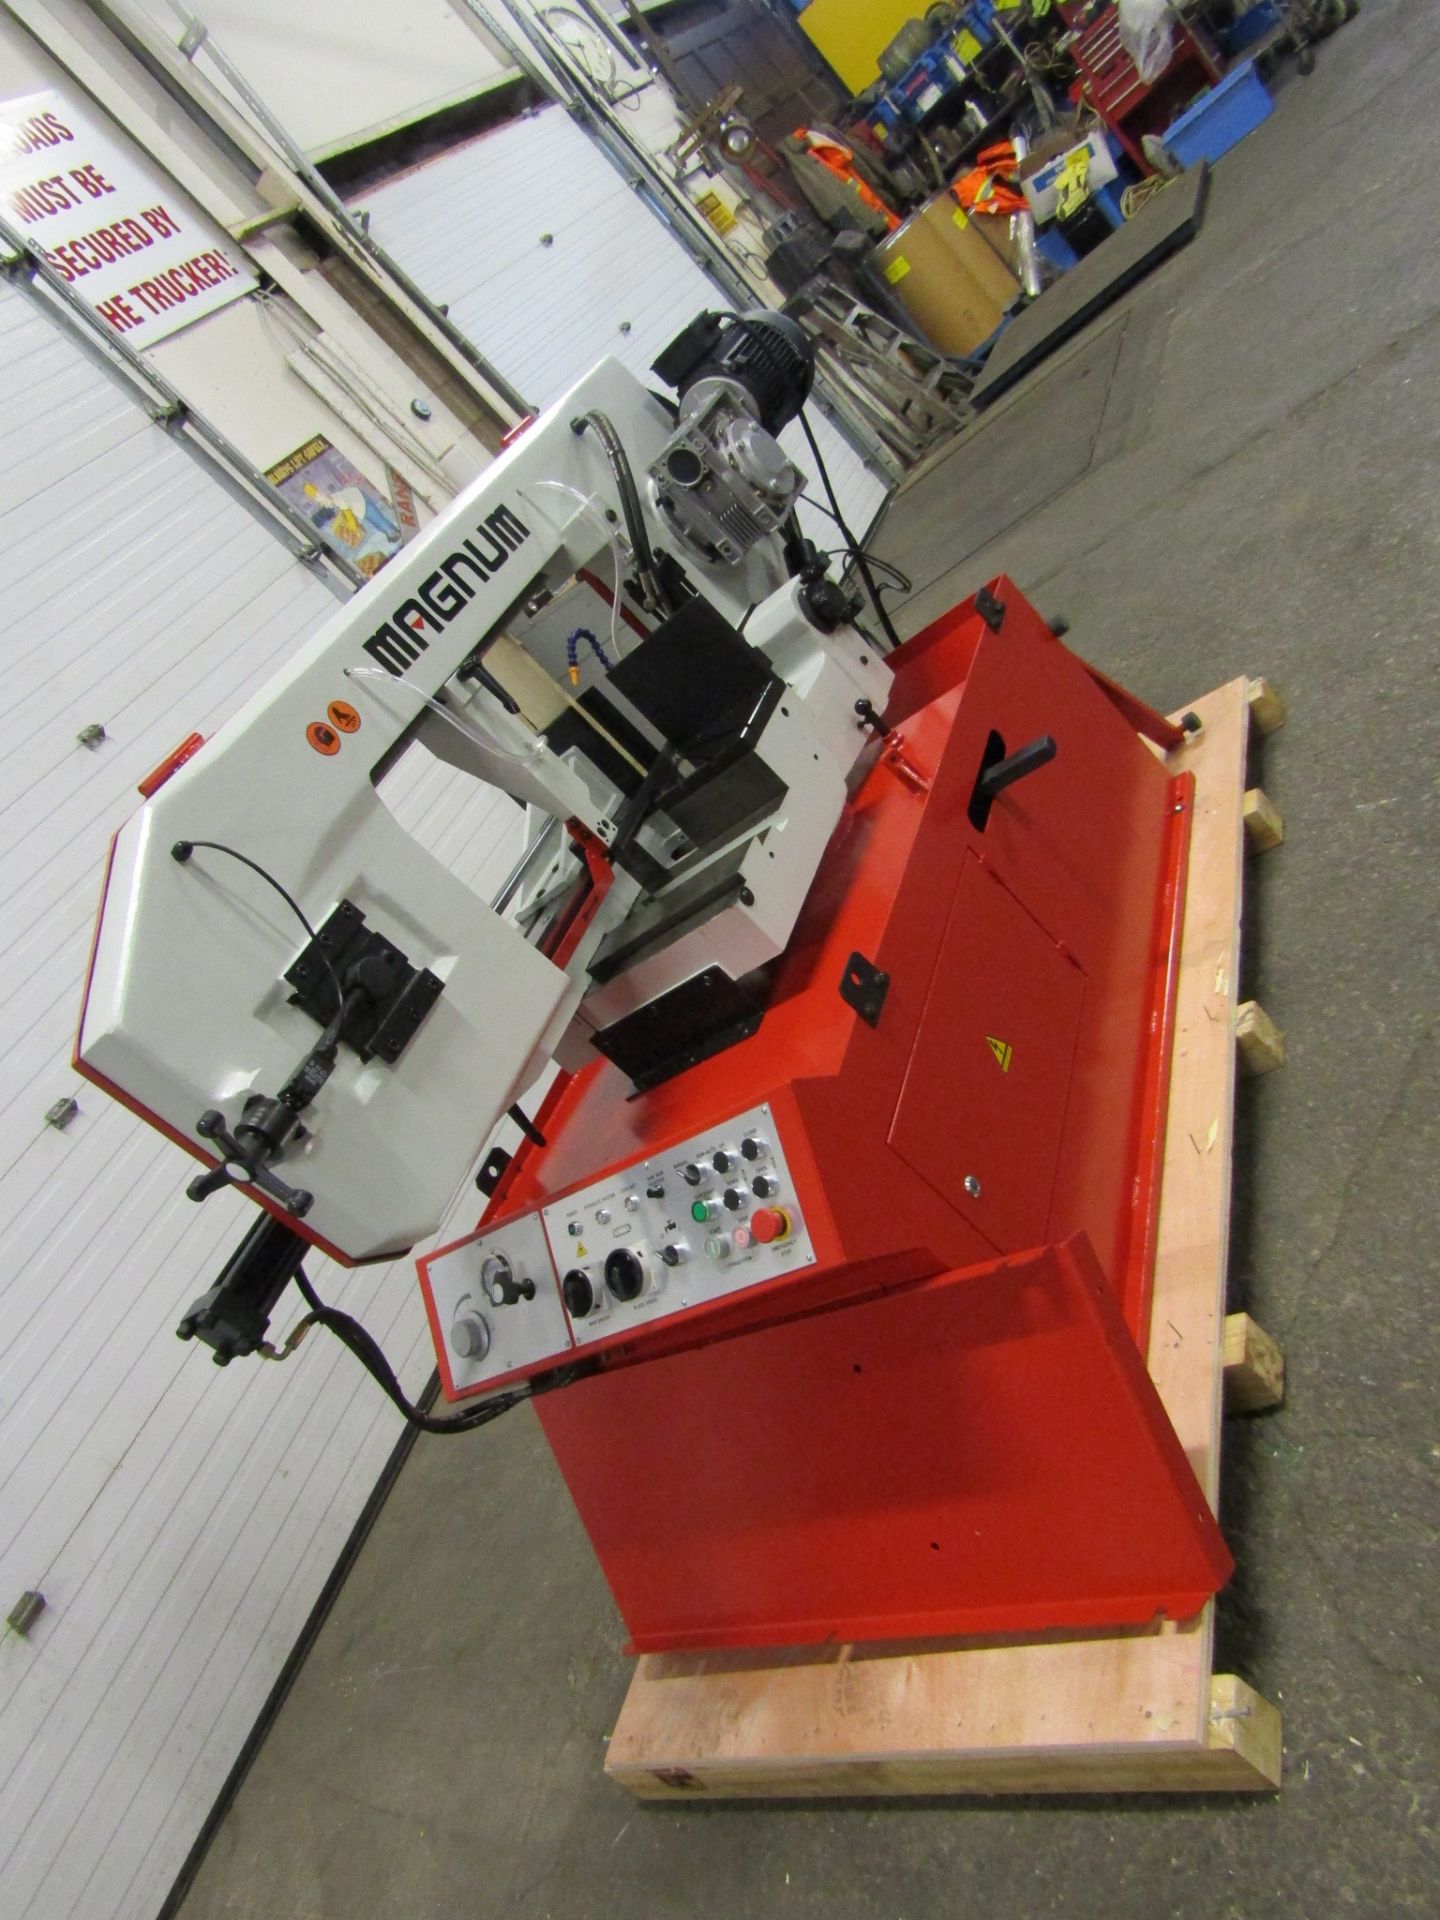 Magnum BS-1616A Horizontal Band Saw - 16 X 16 inch CUTTING CAPACITY - MINT & UNUSED 220V - Image 4 of 4